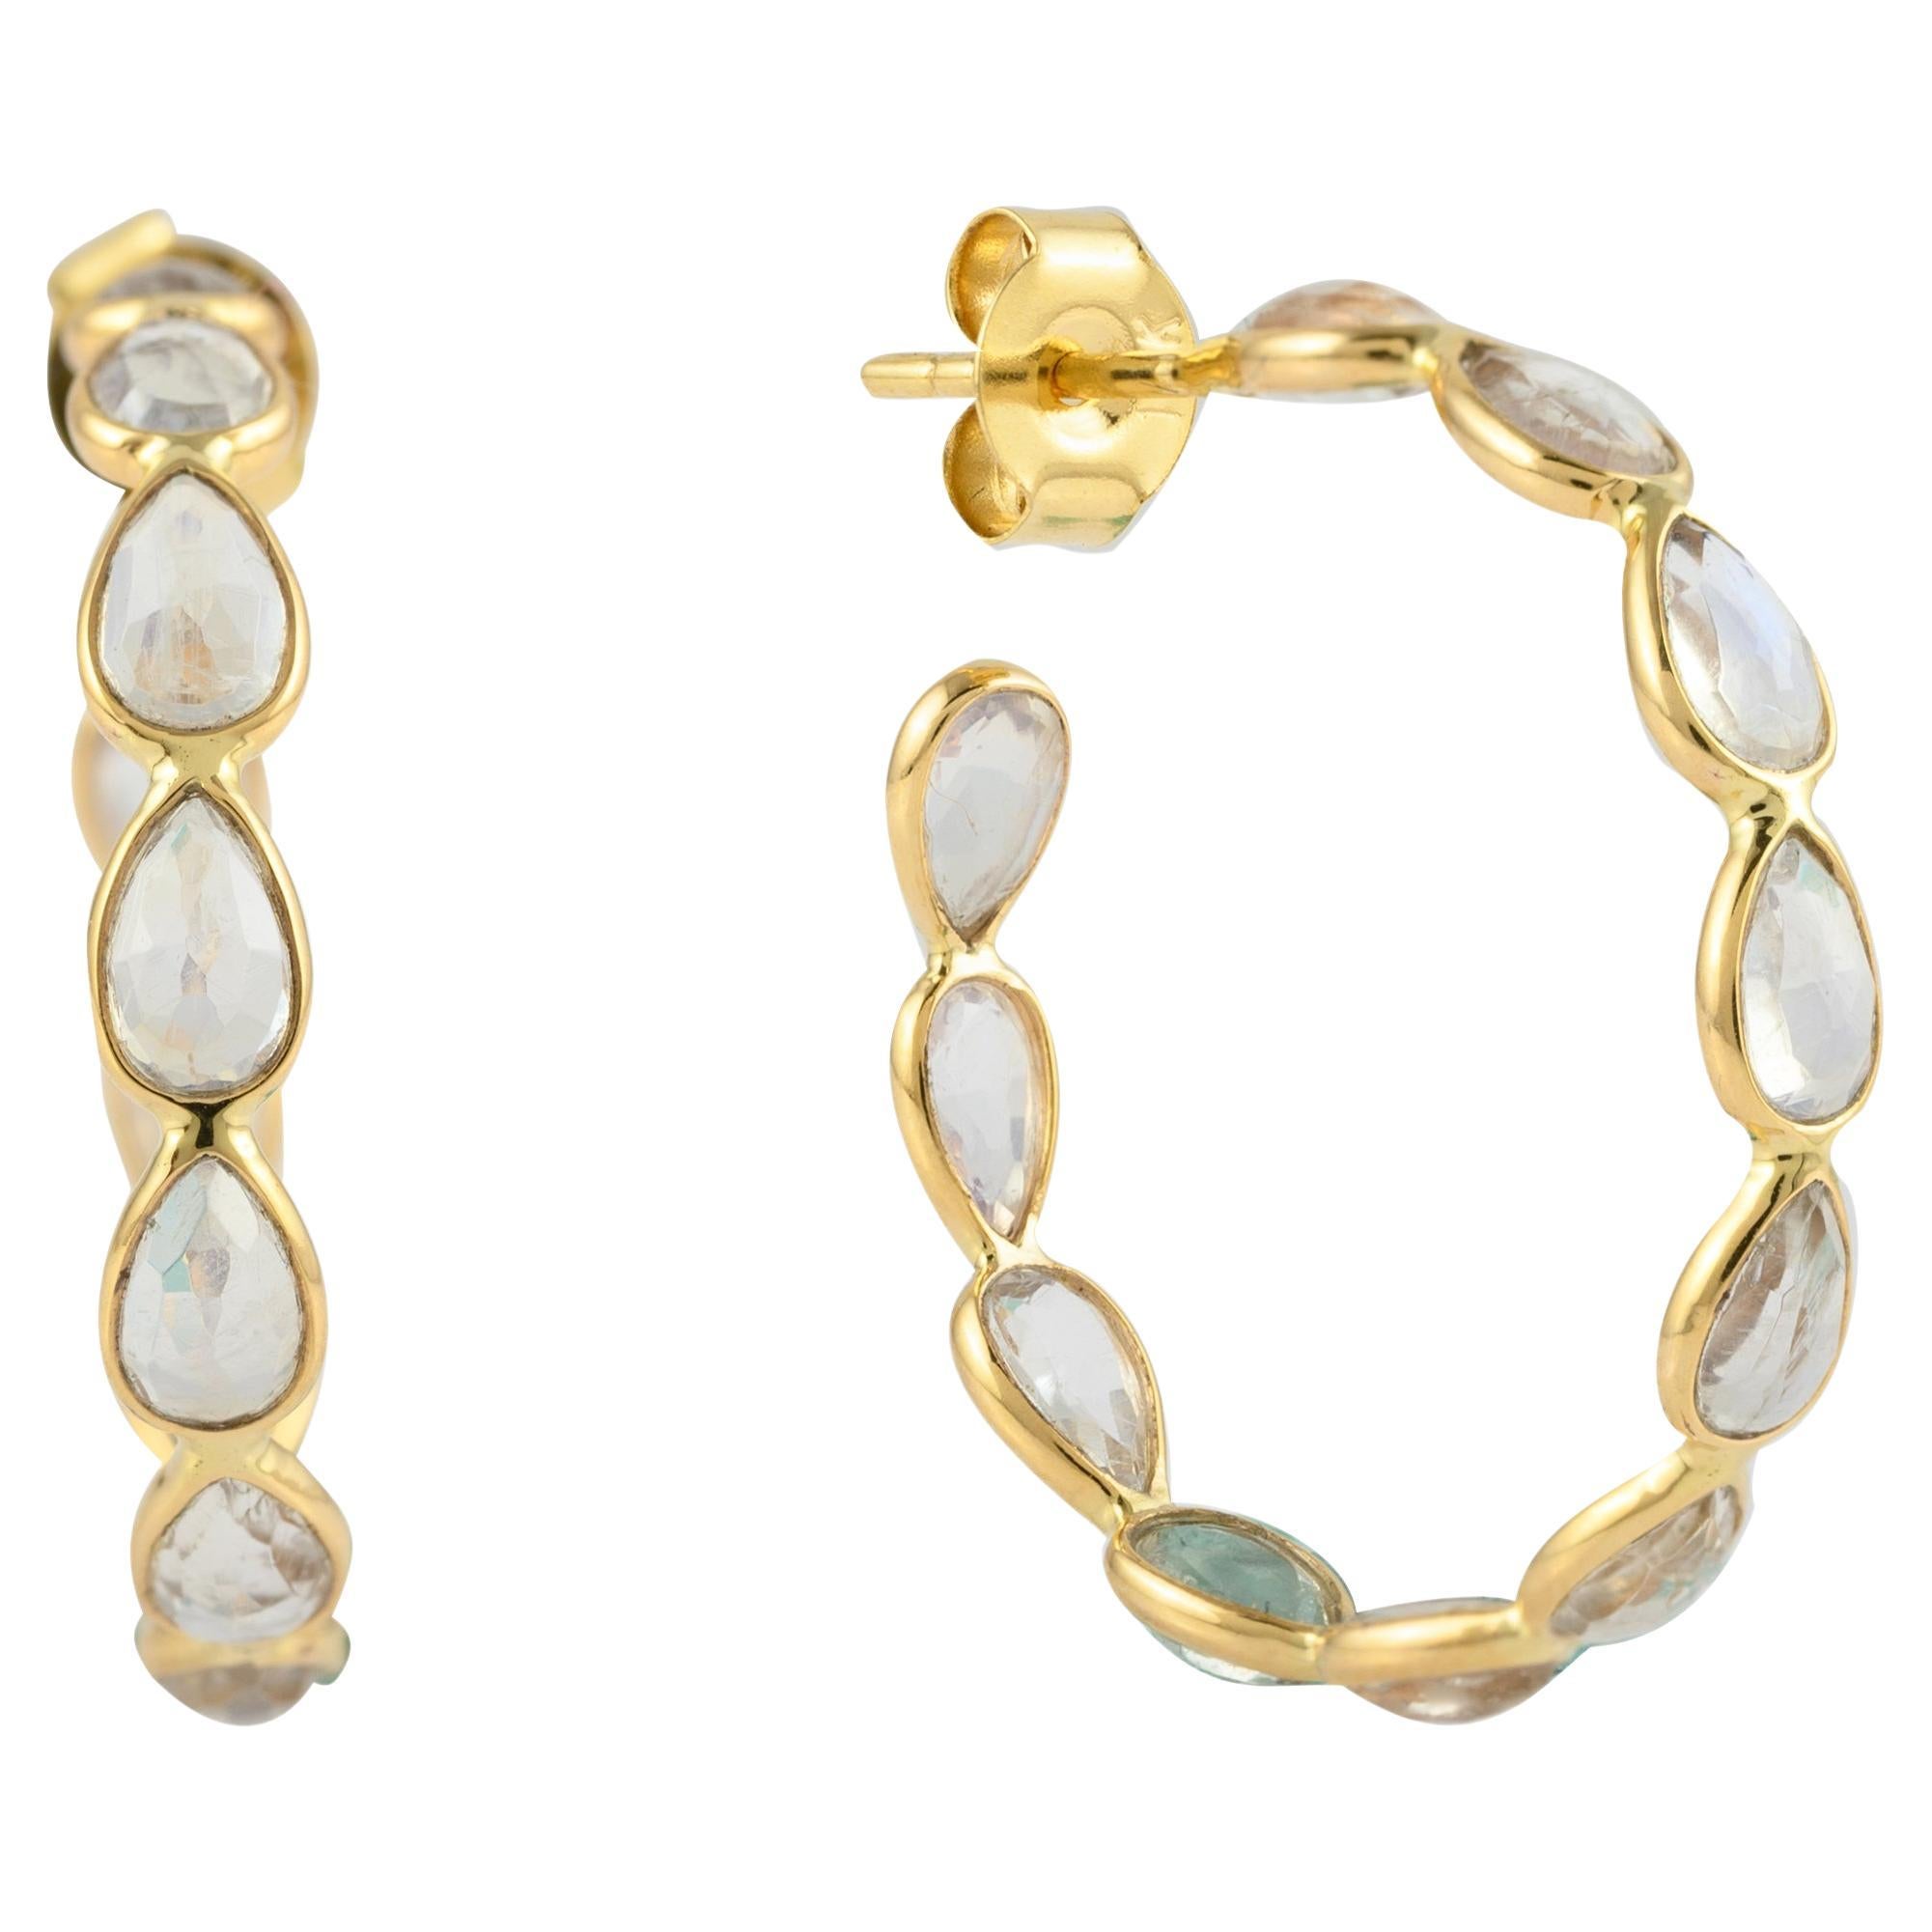 Natural Rainbow Moonstone Hoop Earrings Mounted in Solid 14k Yellow Gold for Her